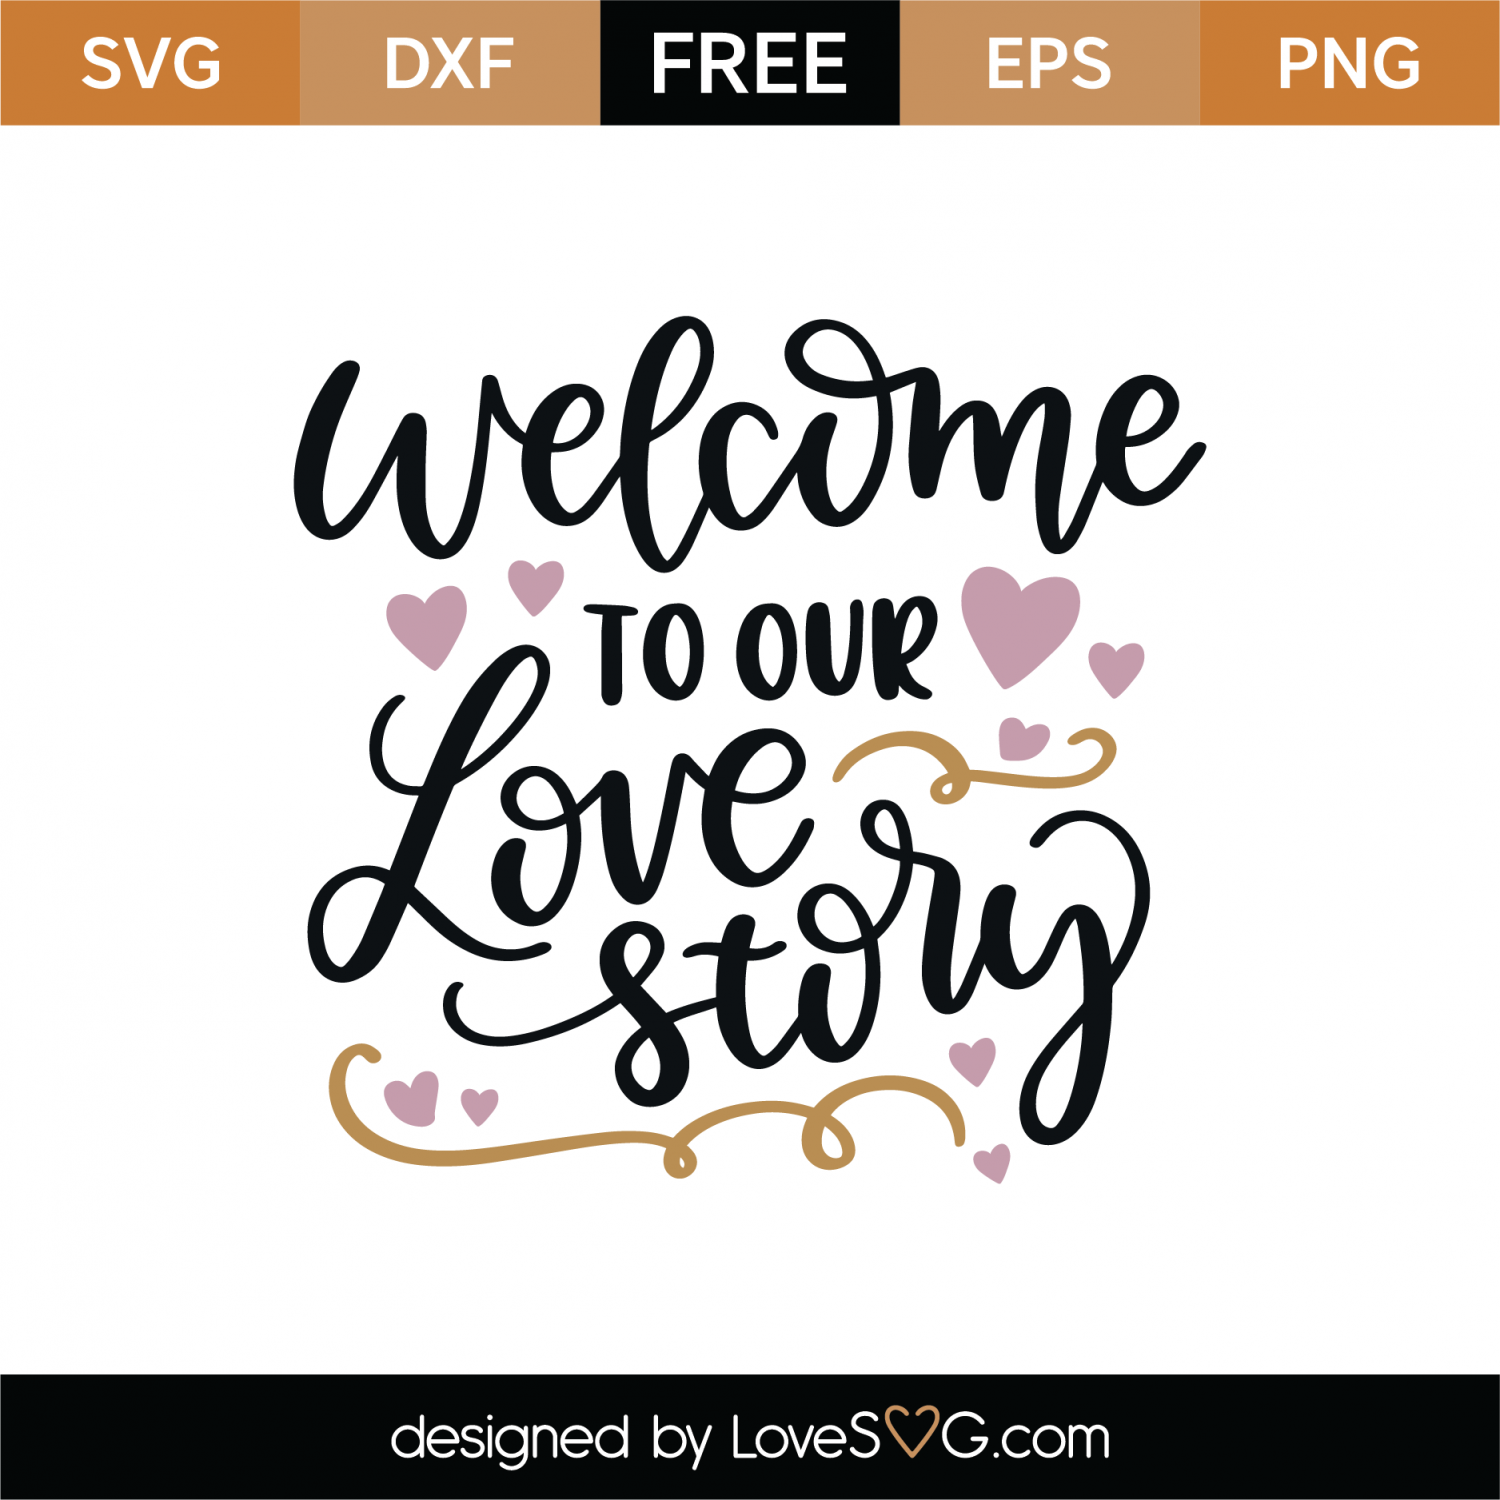 Download Free Welcome To Our Love Story SVG Cut File | Lovesvg.com